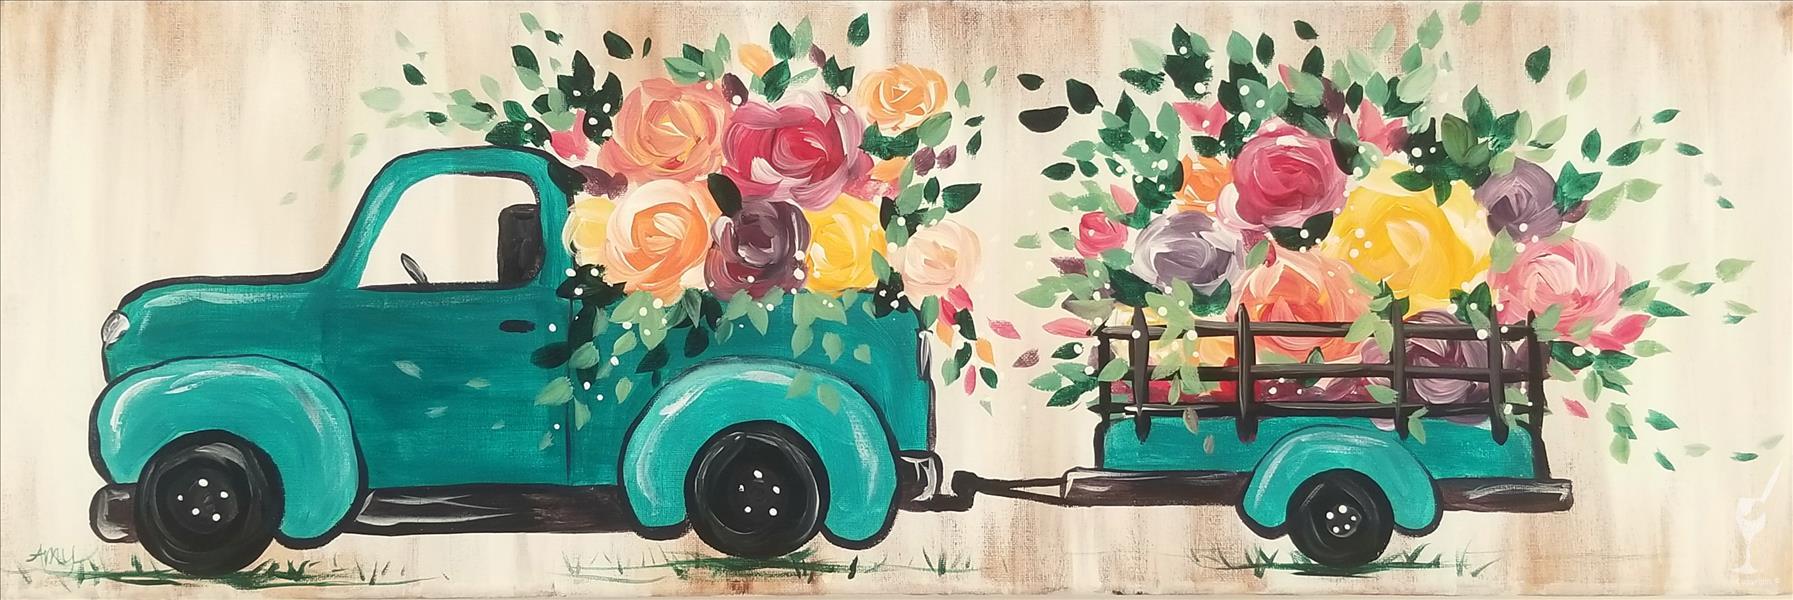 Vintage Floral Truck | Upgrade with DIY Candle